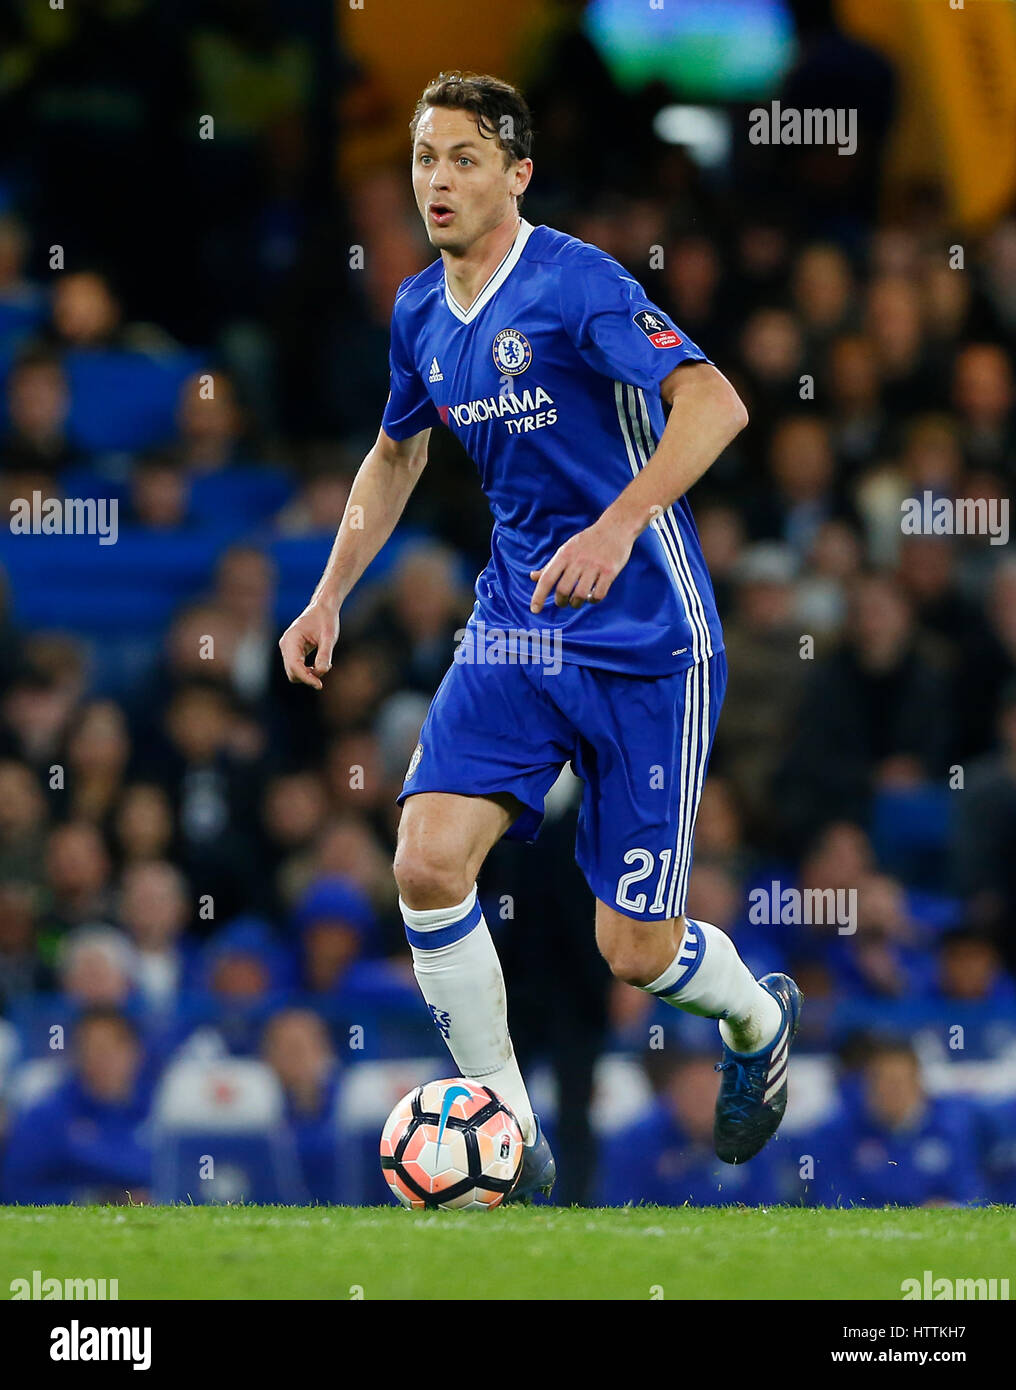 Nemanja Matic of Chelsea during the FA Cup match between Chelsea and Manchester United at Stamford Bridge in London. March 13, 2017. James Boardman / Telephoto Images +44 7967 642437 Stock Photo